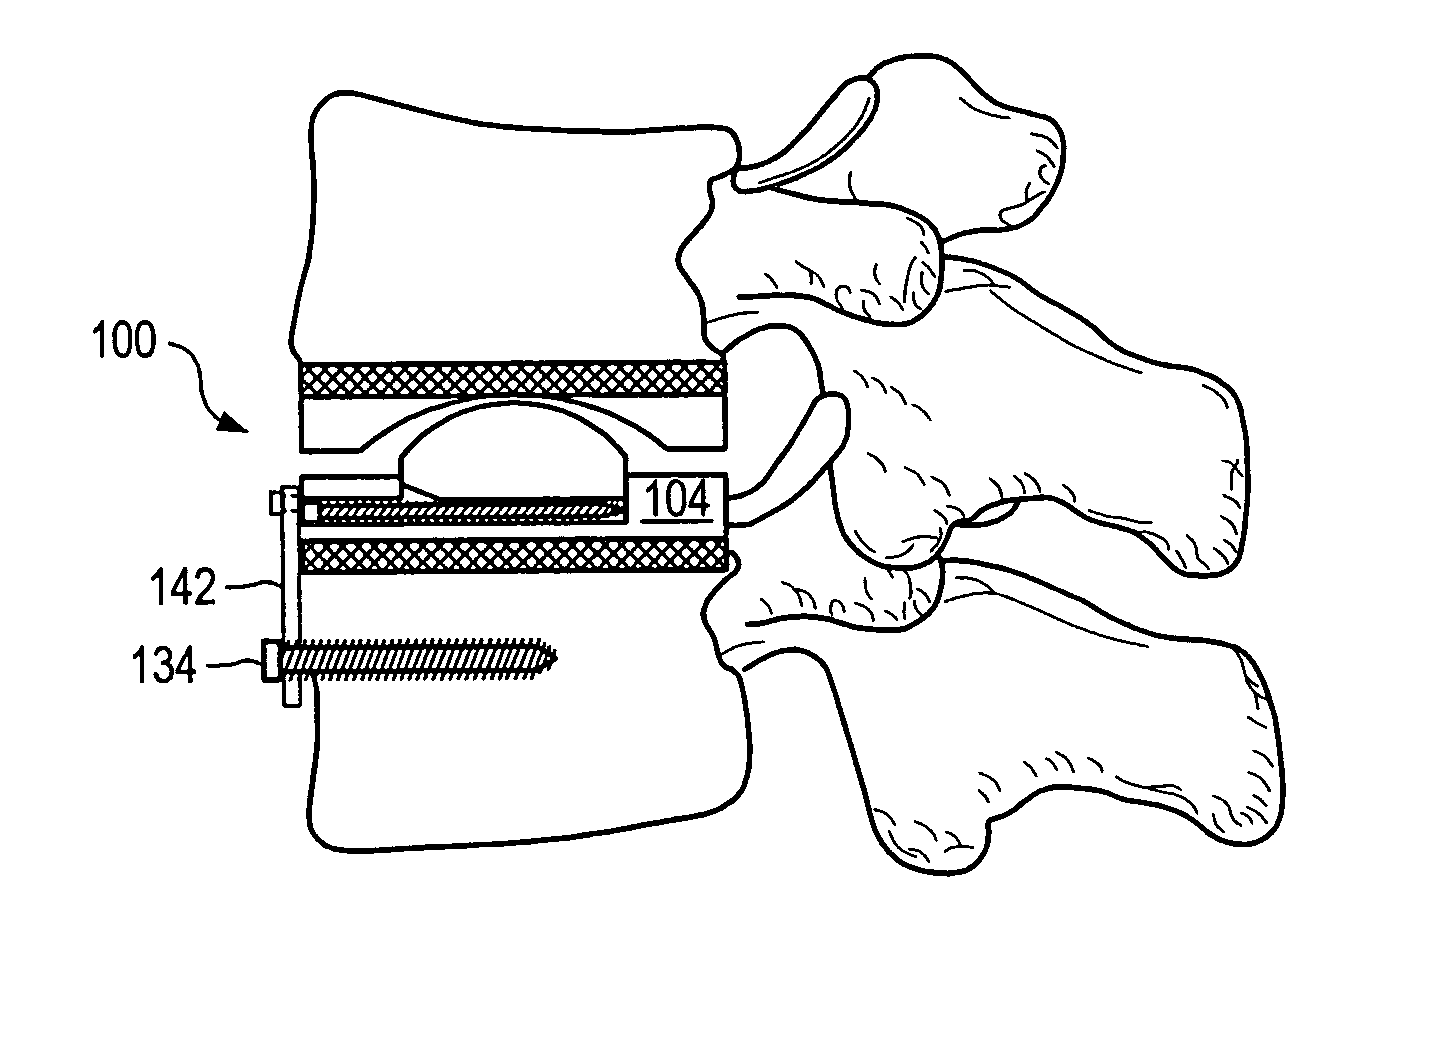 Expandable articulating intervertebral implant with cam